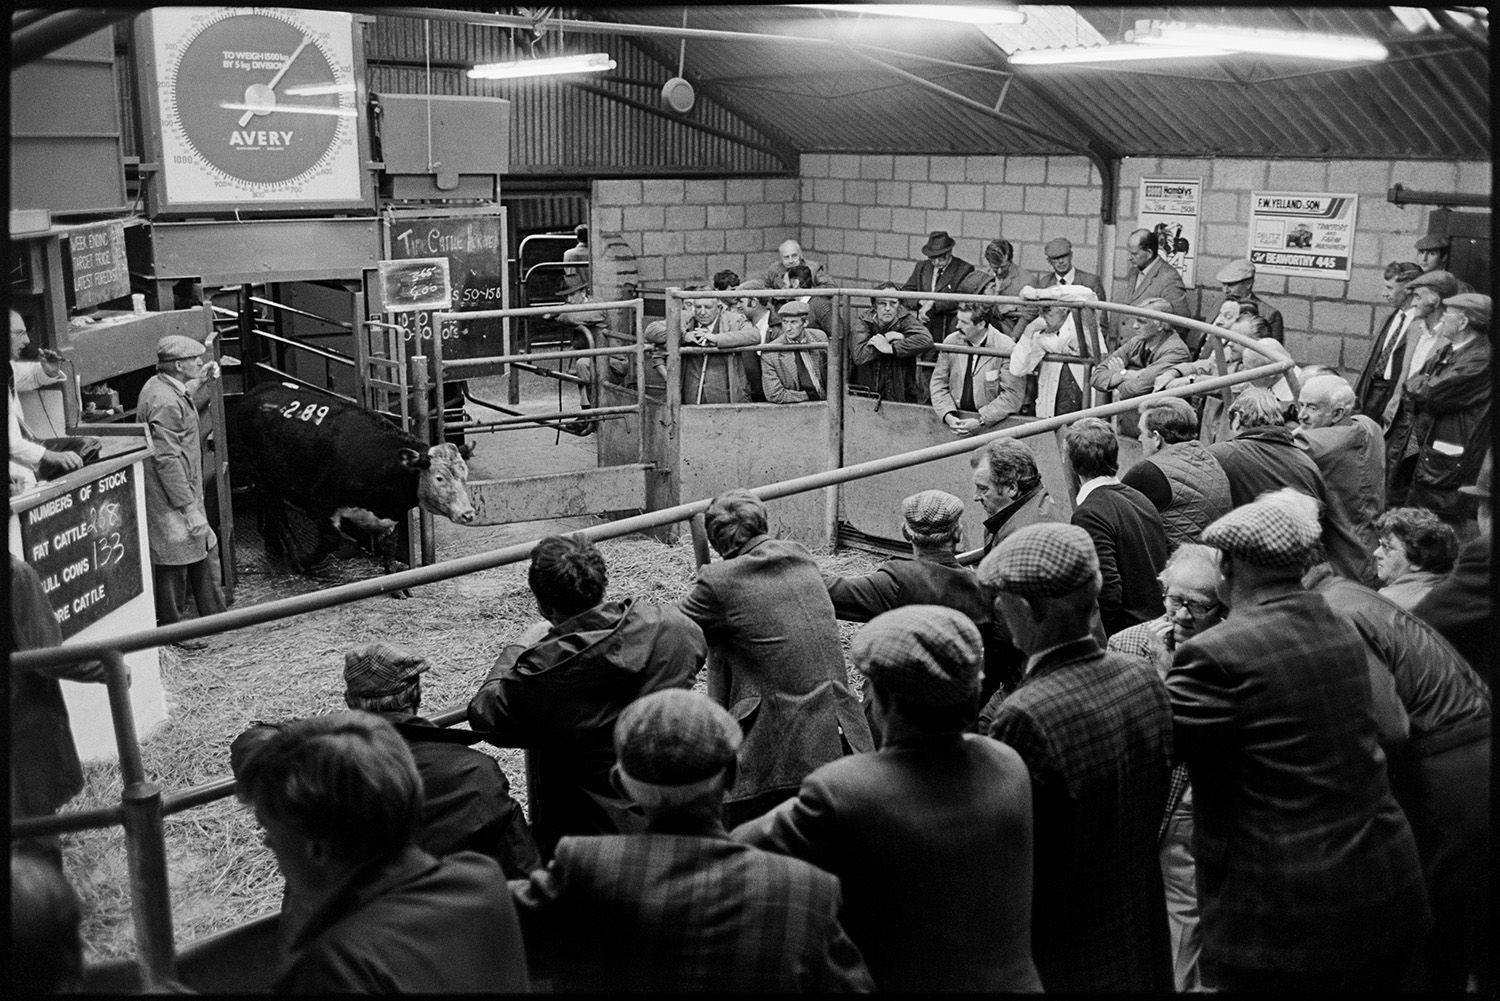 Farmers at market, sheep, cattle being auctioned in ring. 
[Men at cattle auction in Holsworthy Market. A cow is being let into the ring to be auctioned.]